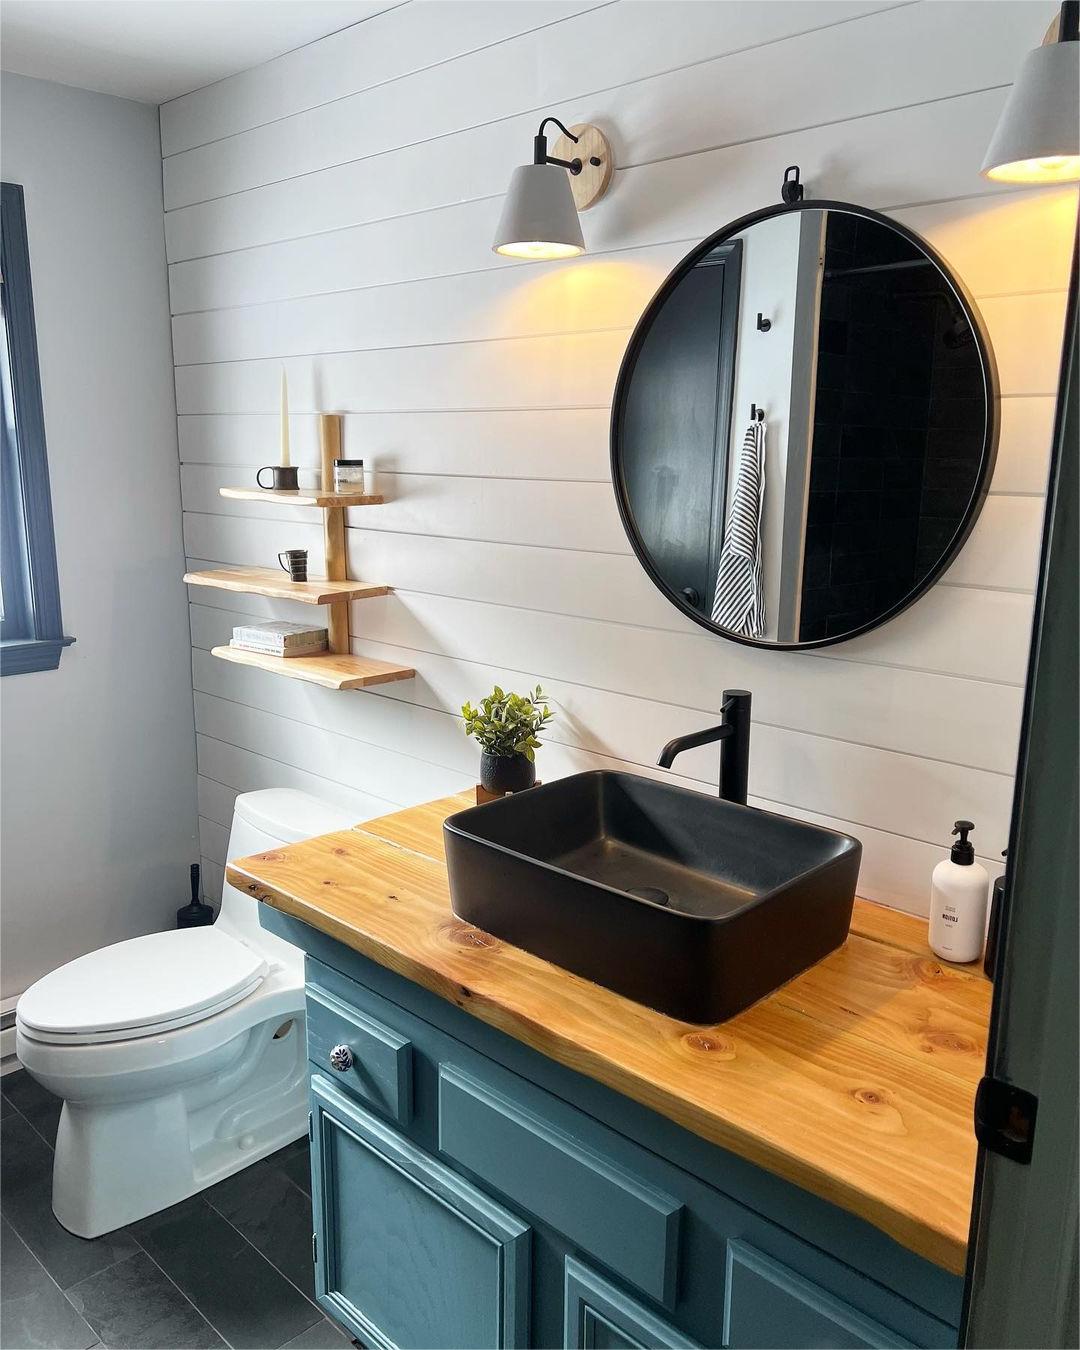 30 small bathroom ideas for Creating Style in Limited Spaces